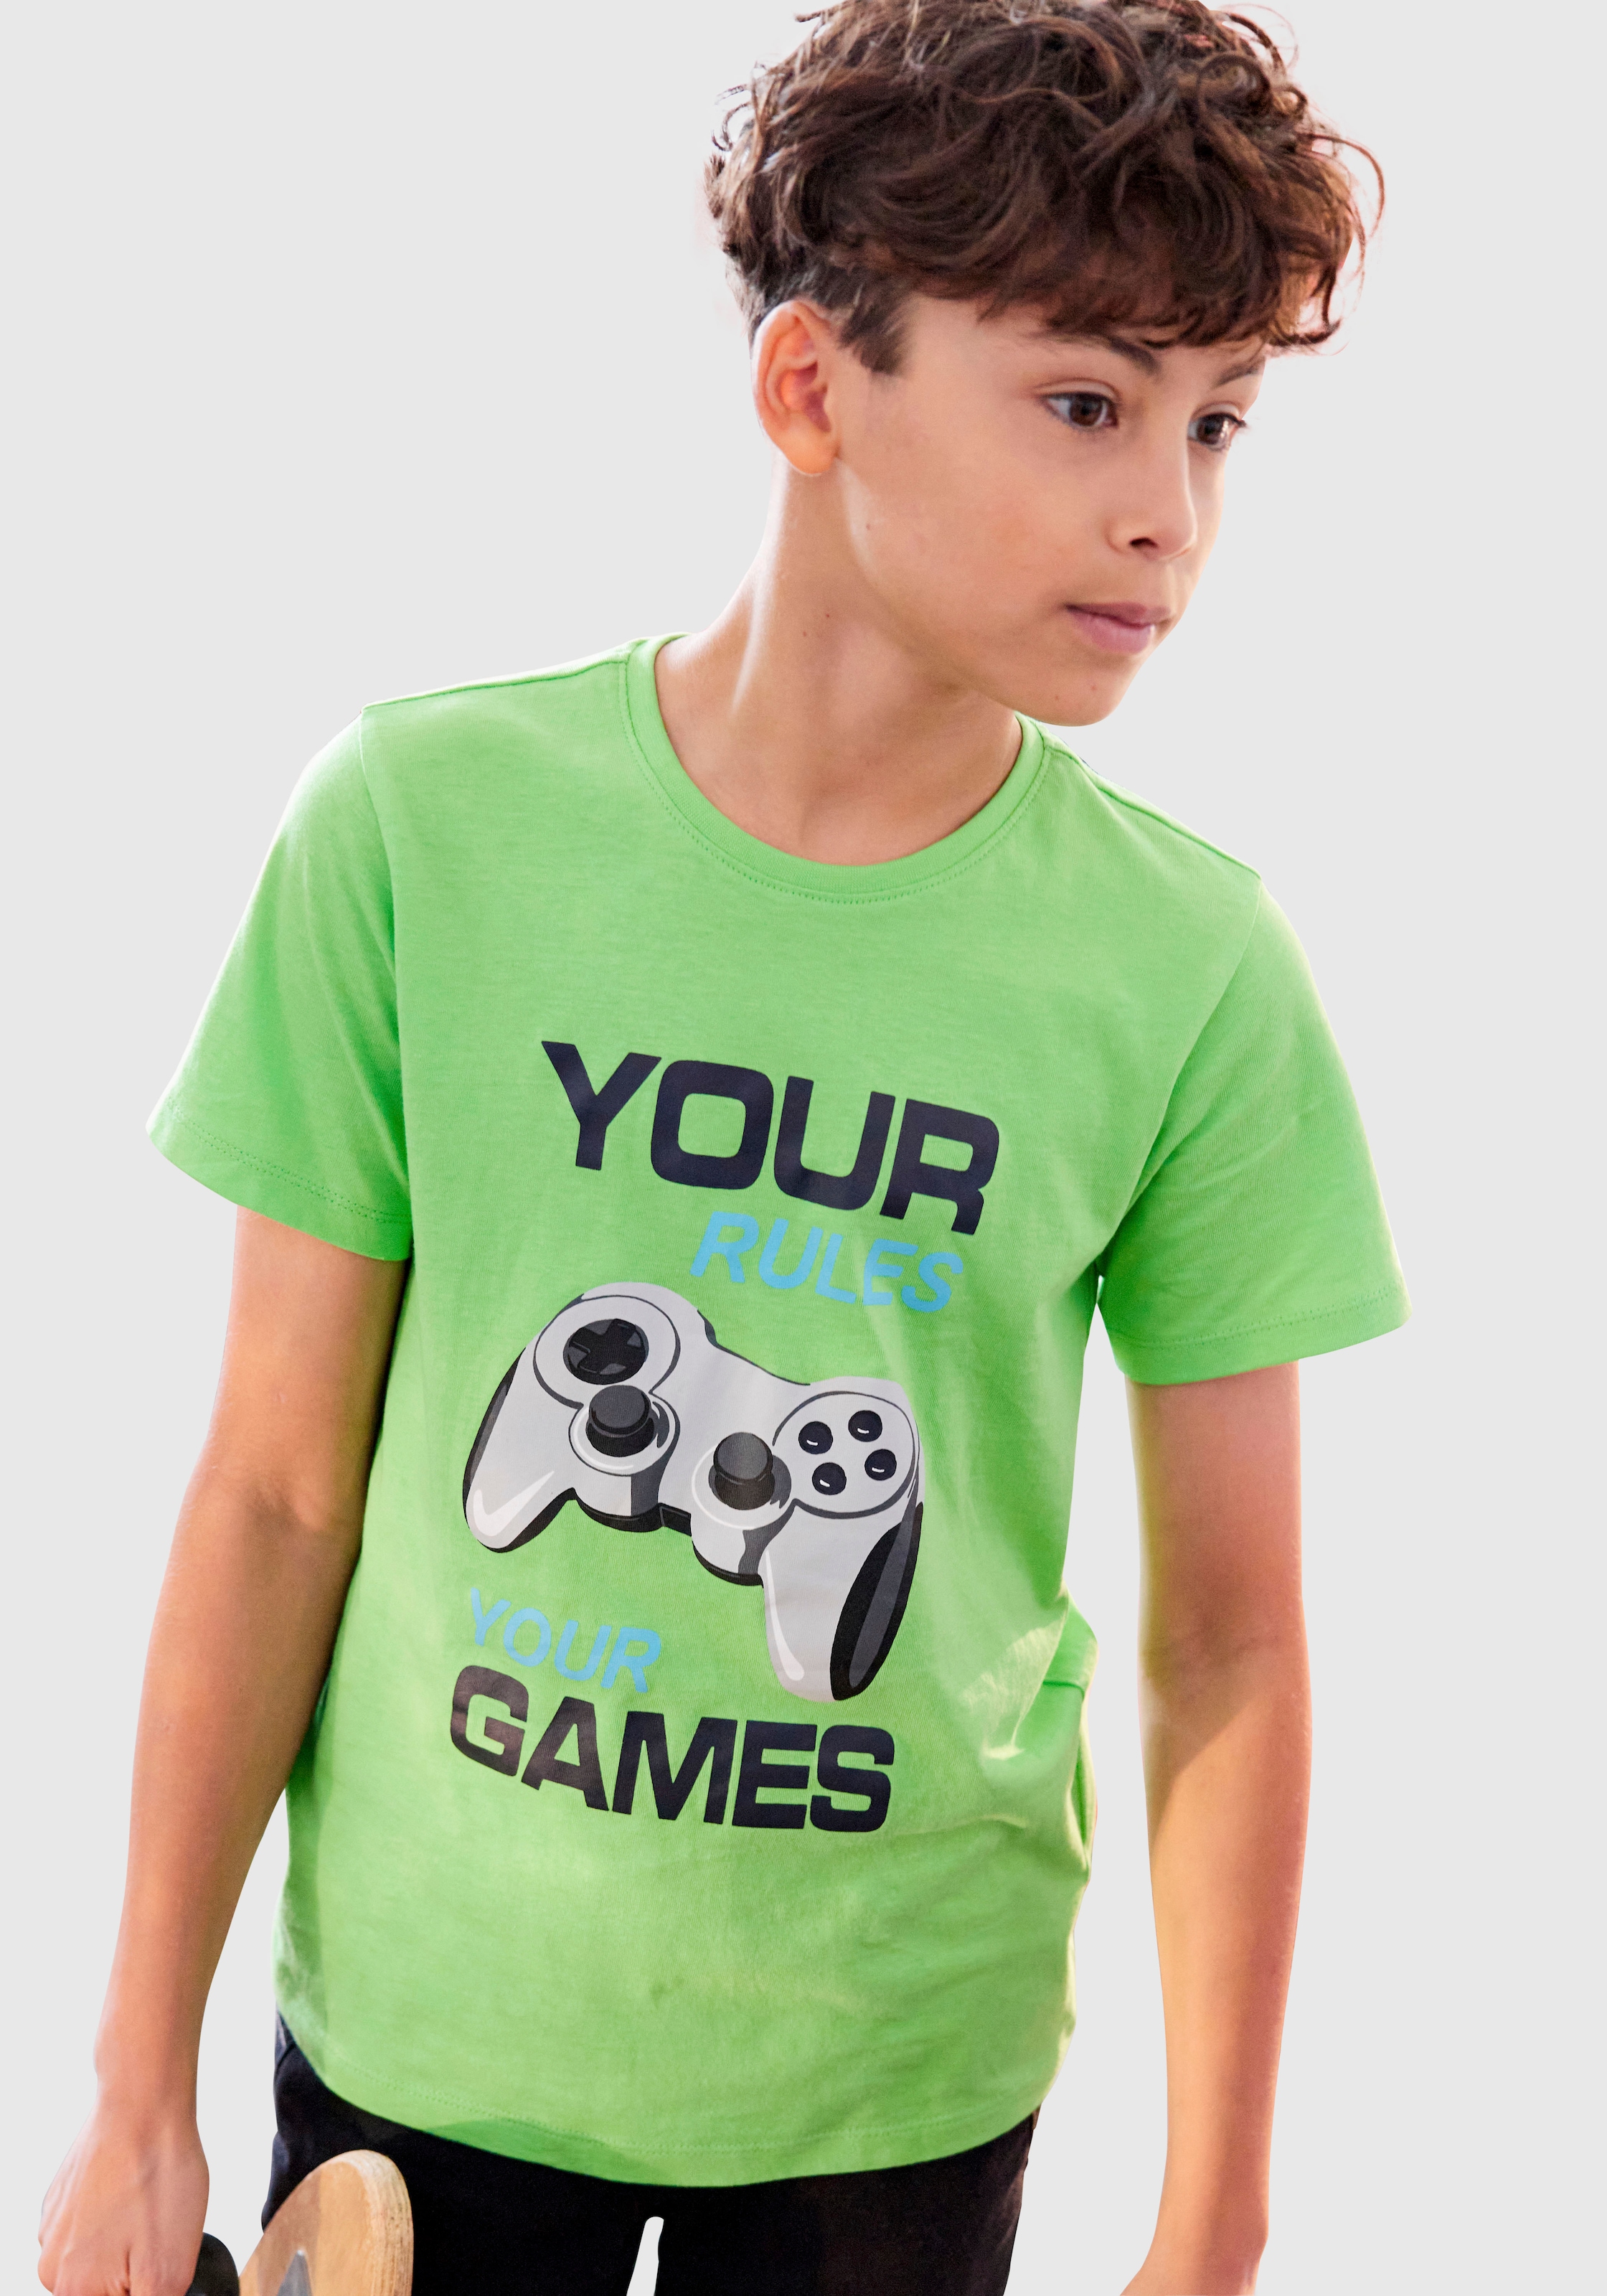 KIDSWORLD T-Shirt bei RULES GAMES« »YOUR YOUR